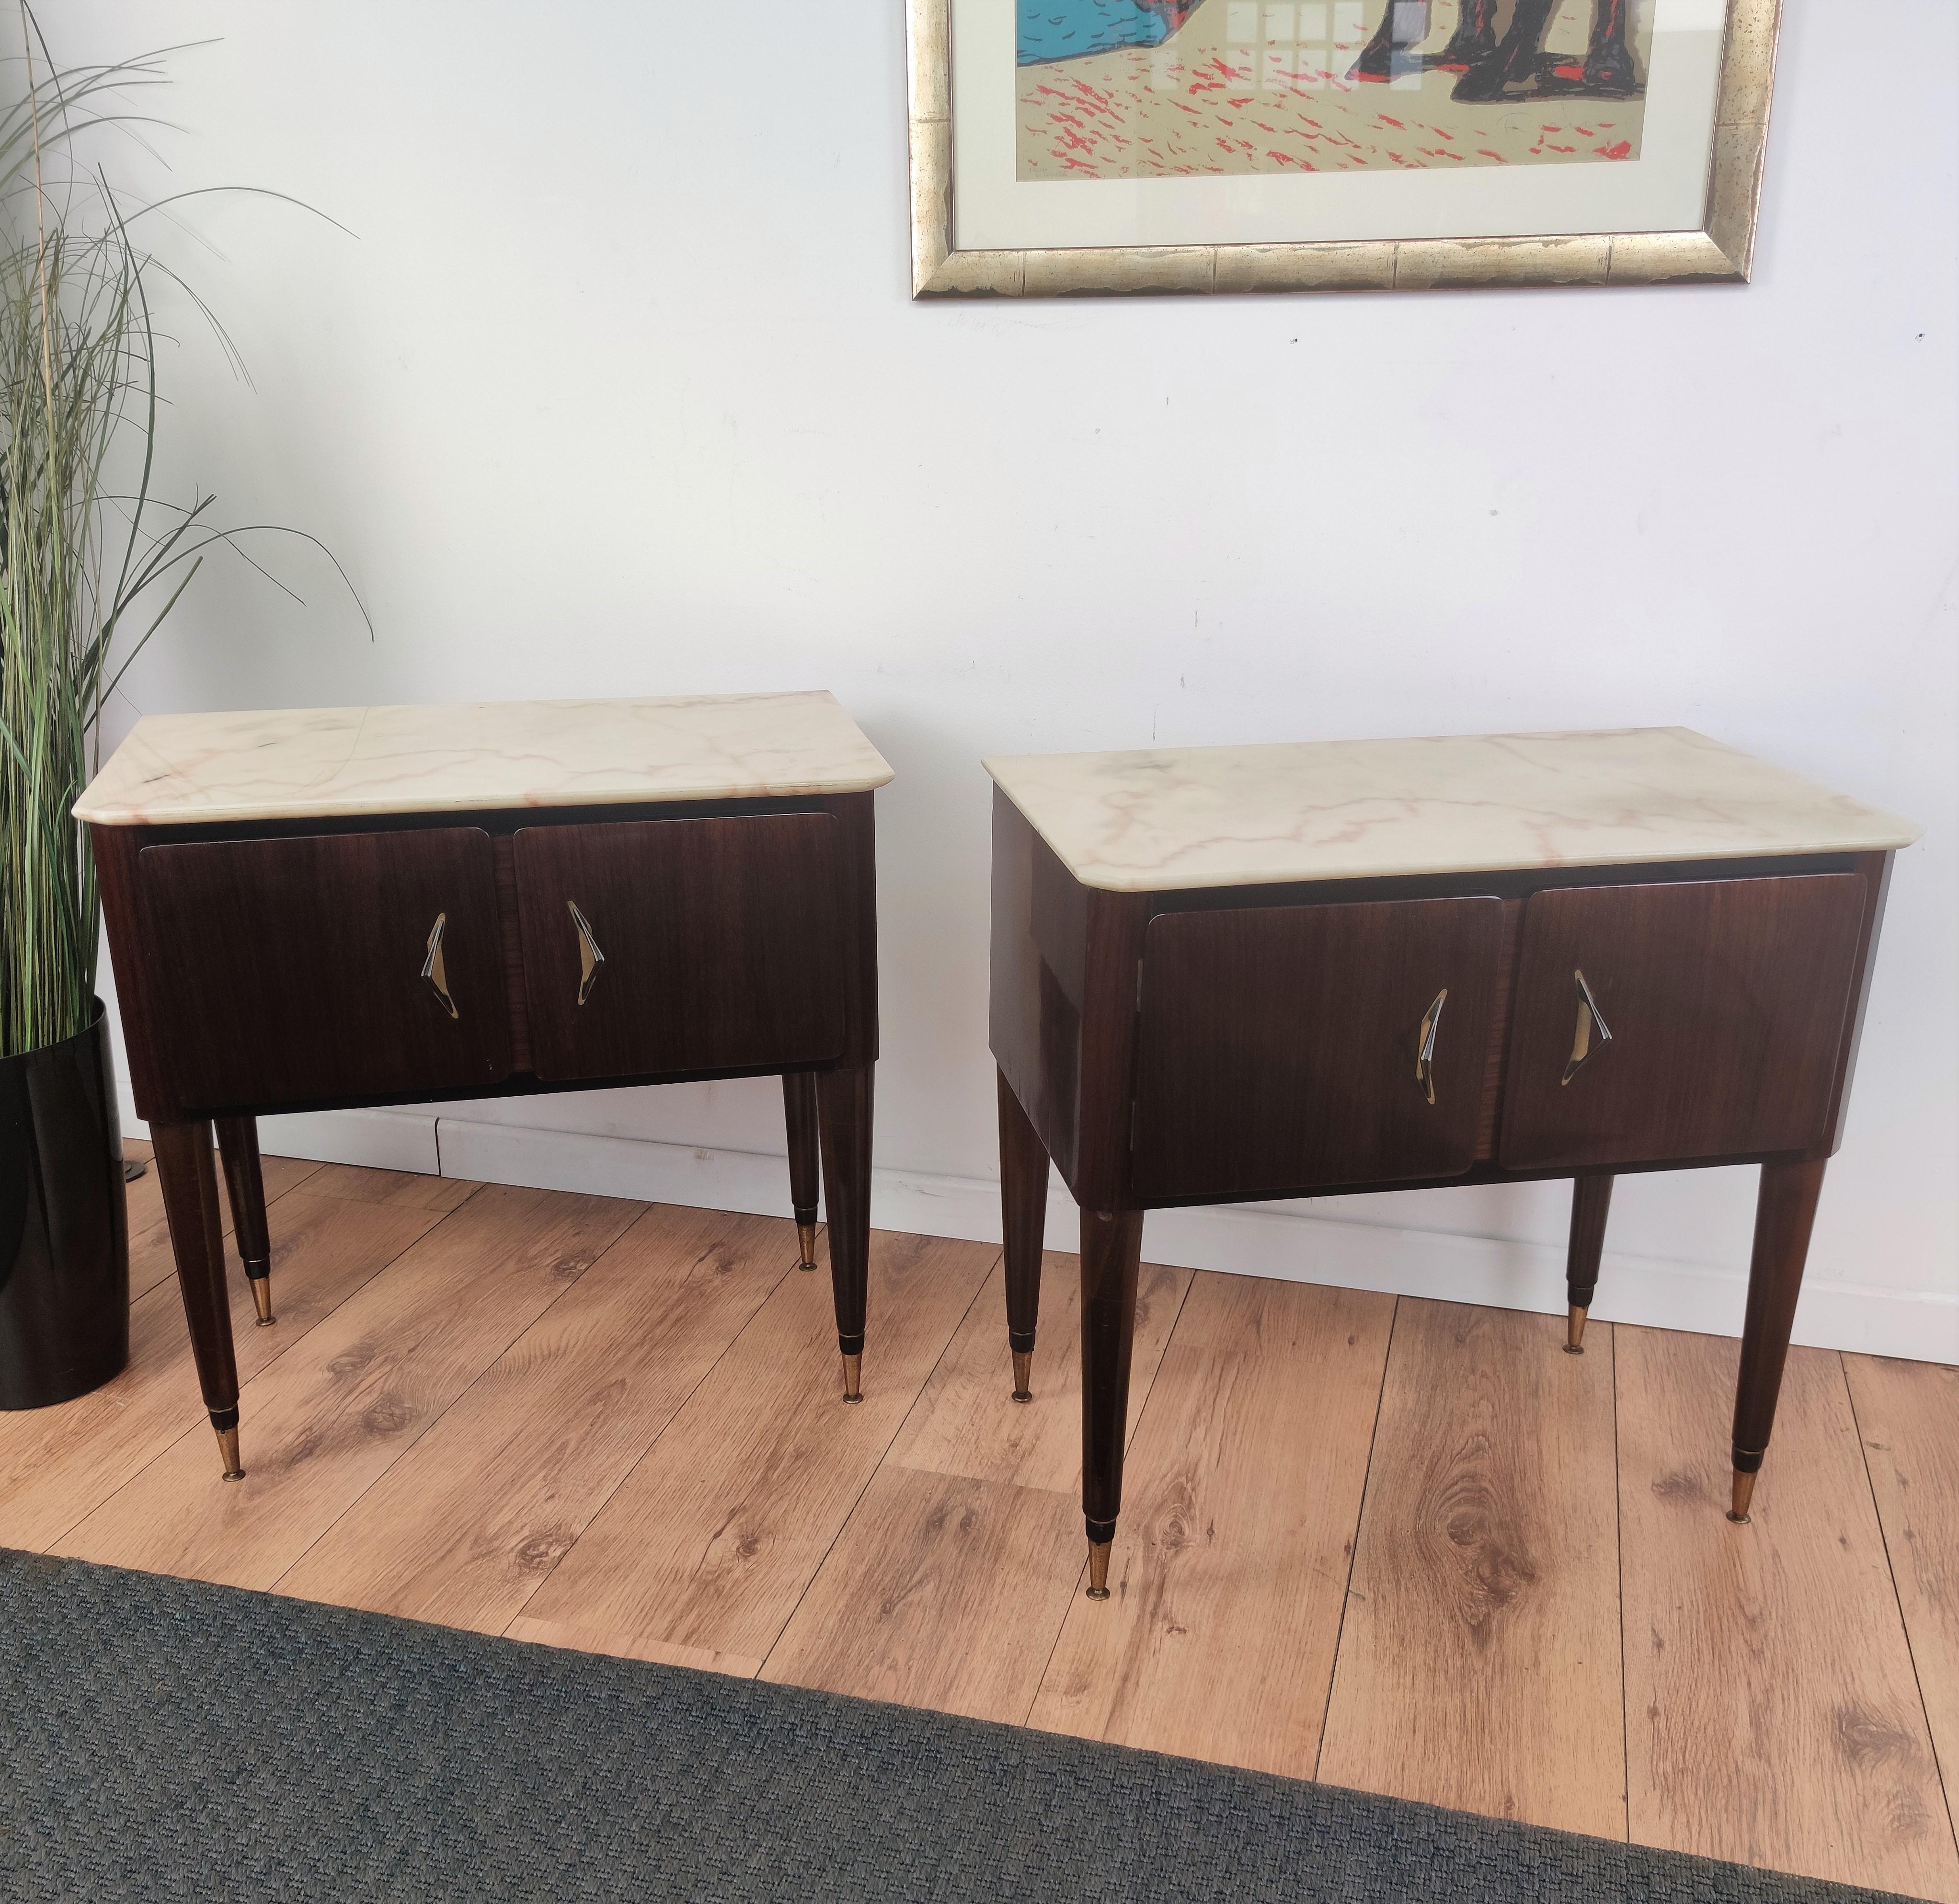 20th Century Pair of Mid-Century Italian Art Deco Nightstands Bedside Tables White Marble Top